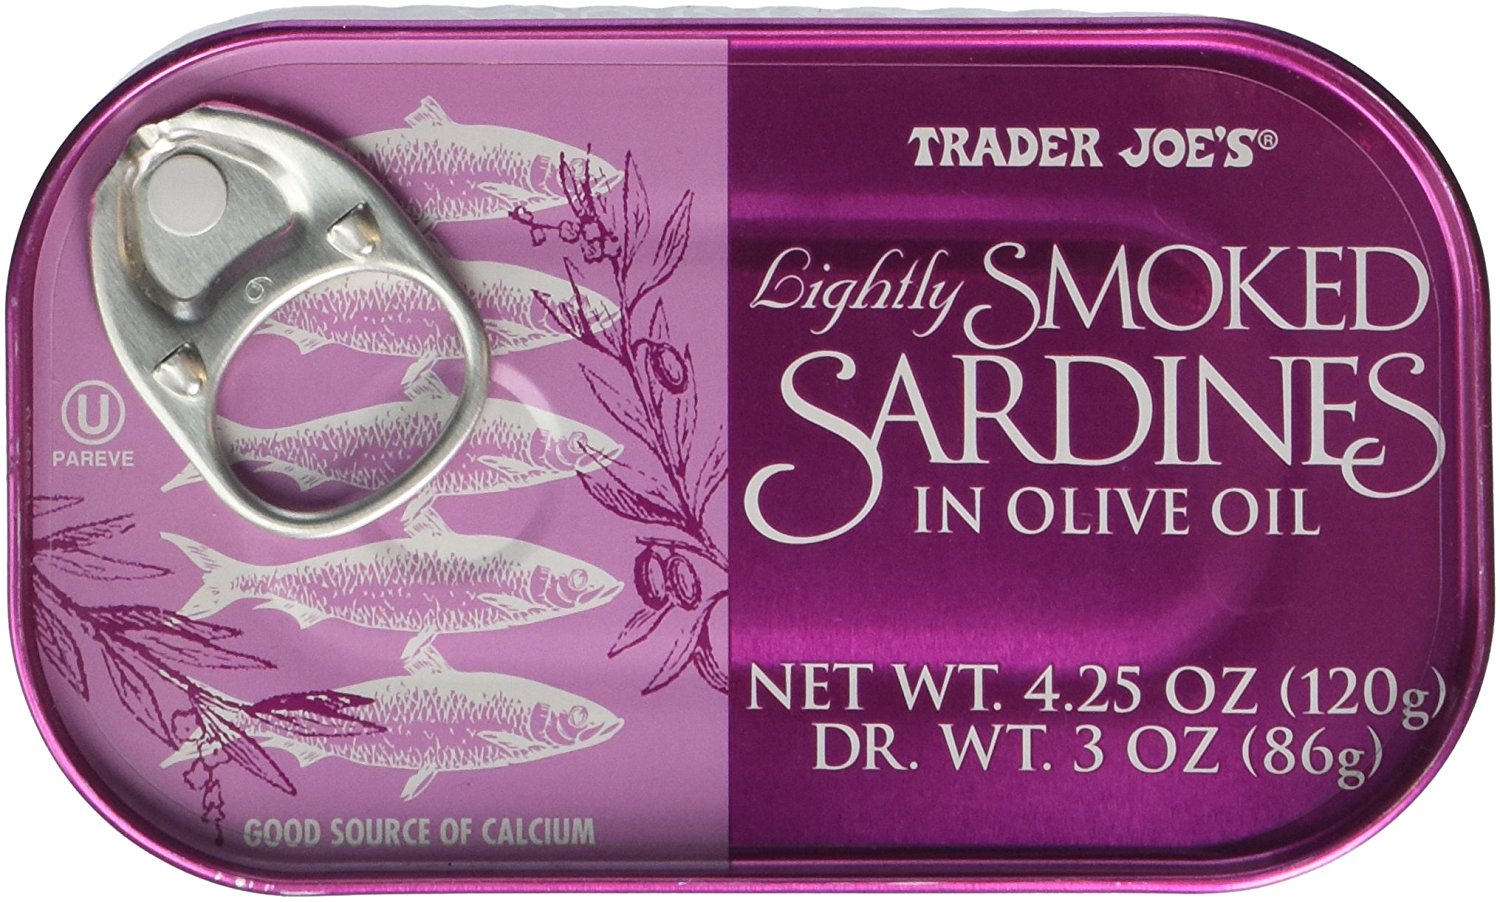 sardines from Trader Joe's make a great weight loss diet trick snack and food to have with omega-3